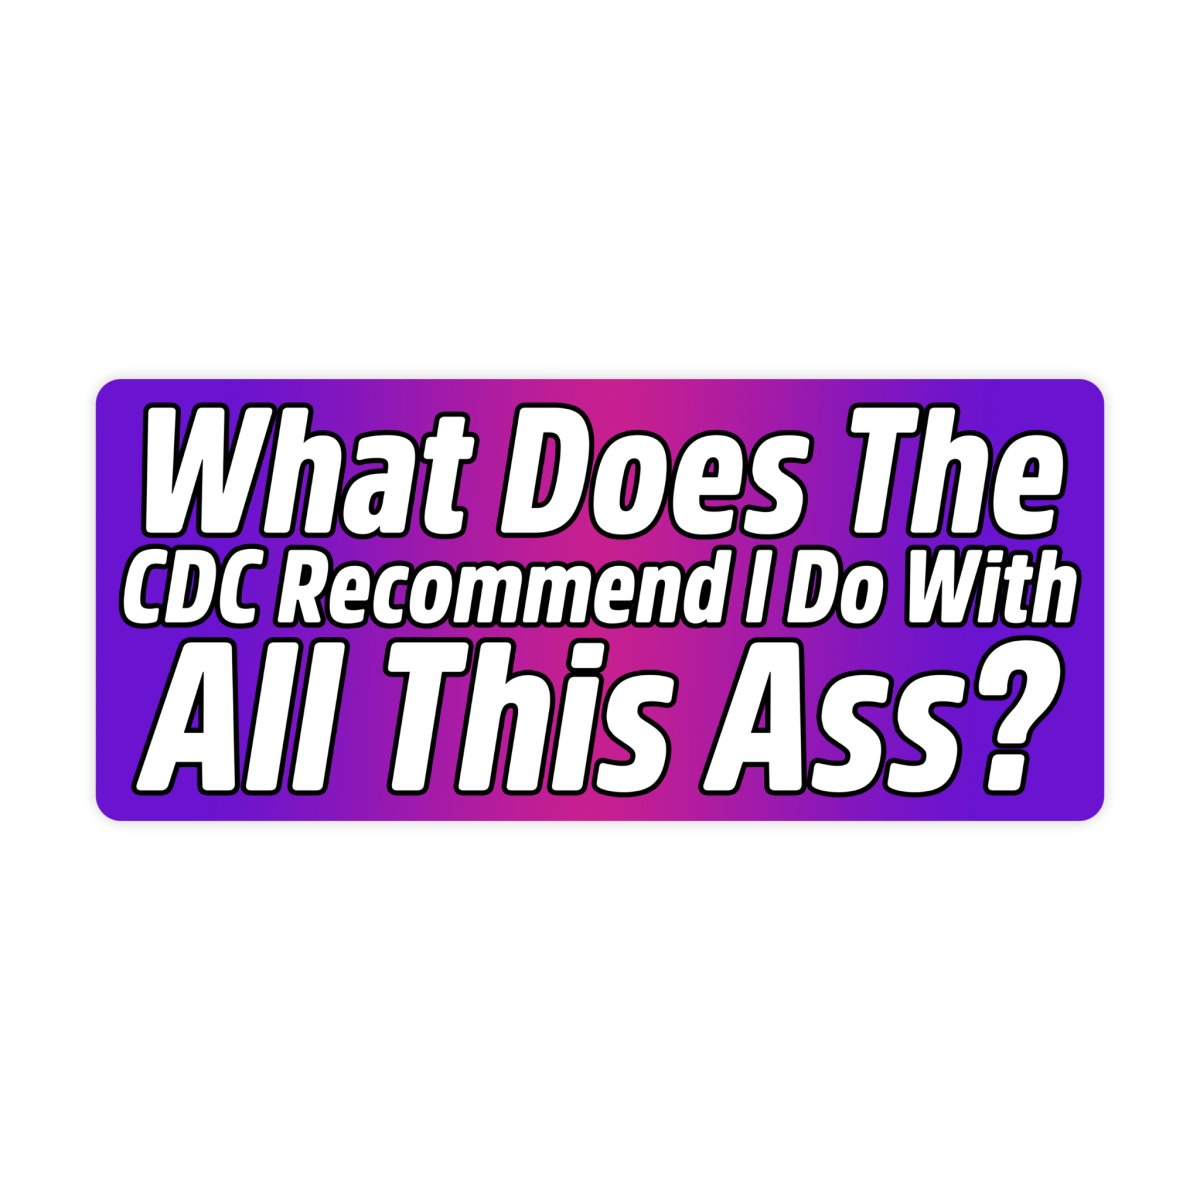 What's The CDC Say I Do With All This Ass Bumper Sticker - stickerbullWhat's The CDC Say I Do With All This Ass Bumper StickerRetail StickerstickerbullstickerbullSage_CDC [#206]What's The CDC Say I Do With All This Ass Bumper Sticker